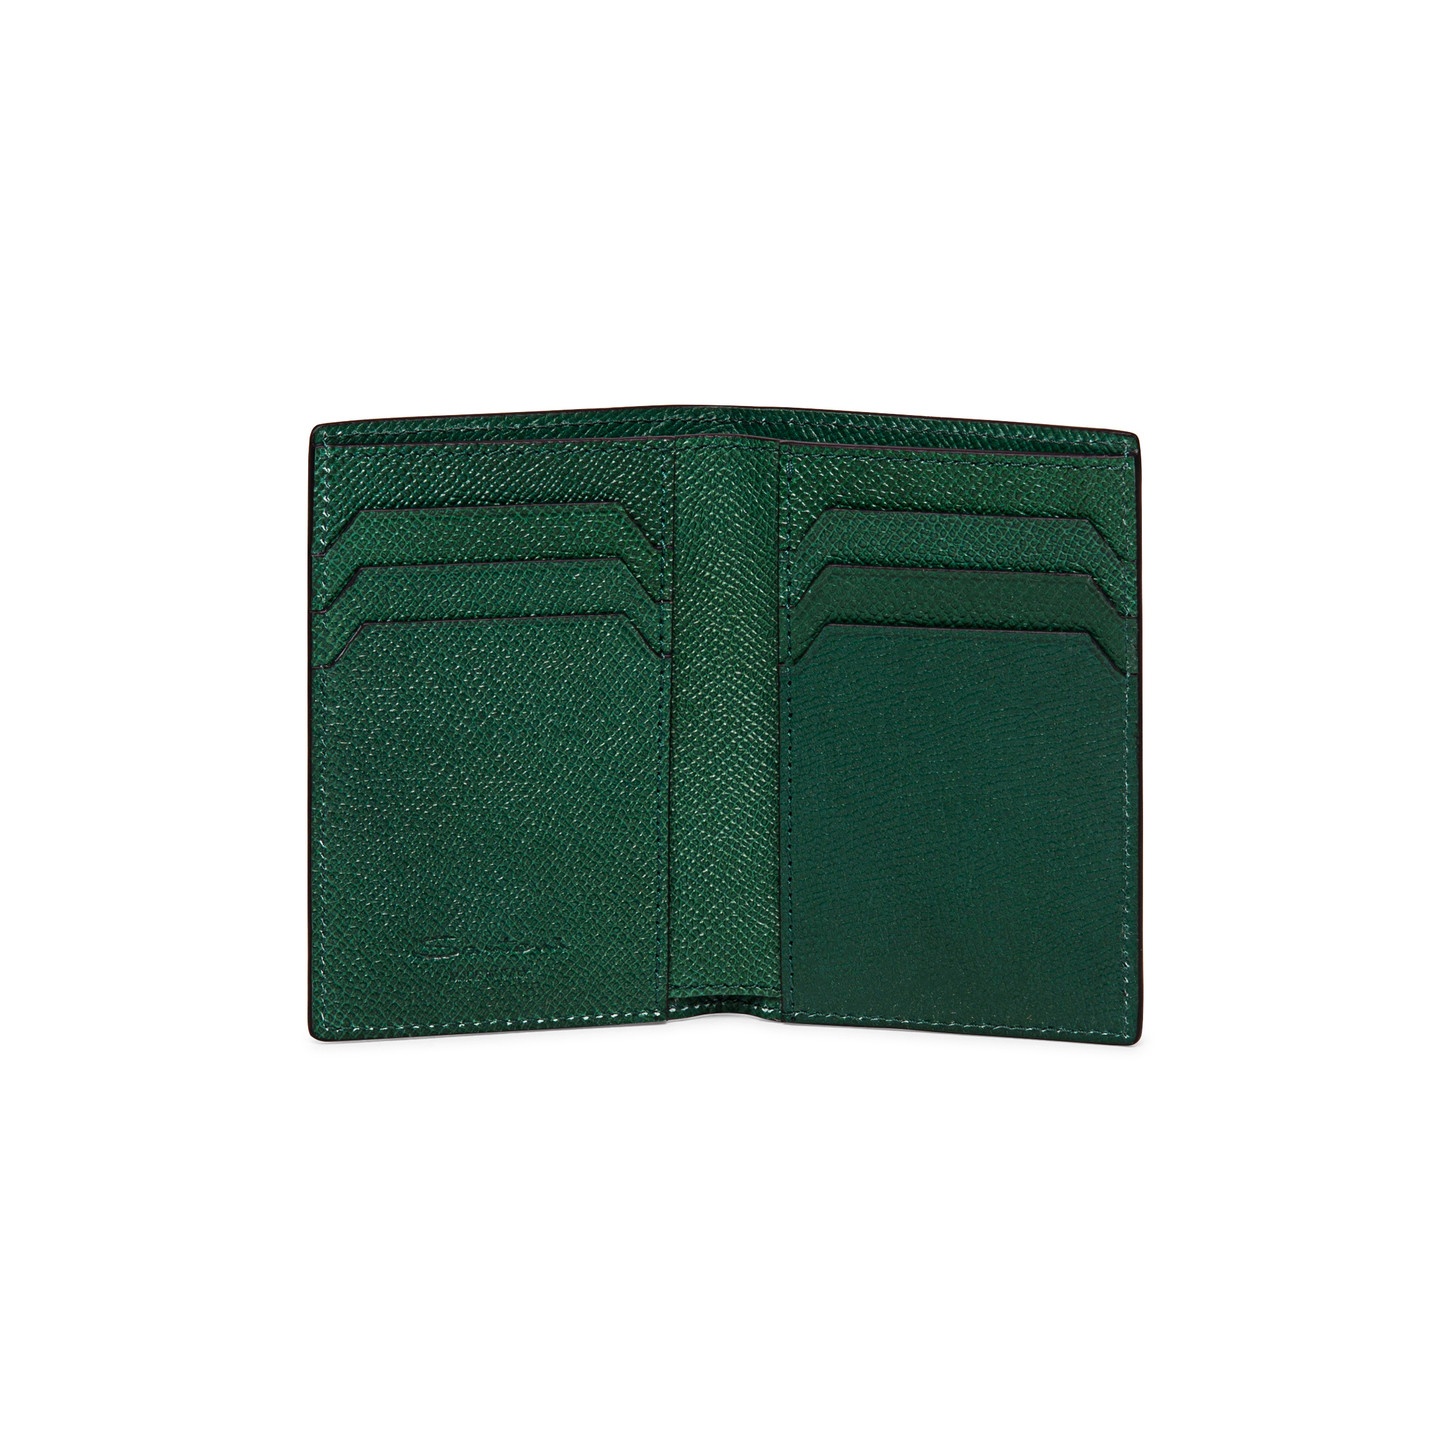 Green saffiano leather vertical wallet - 3